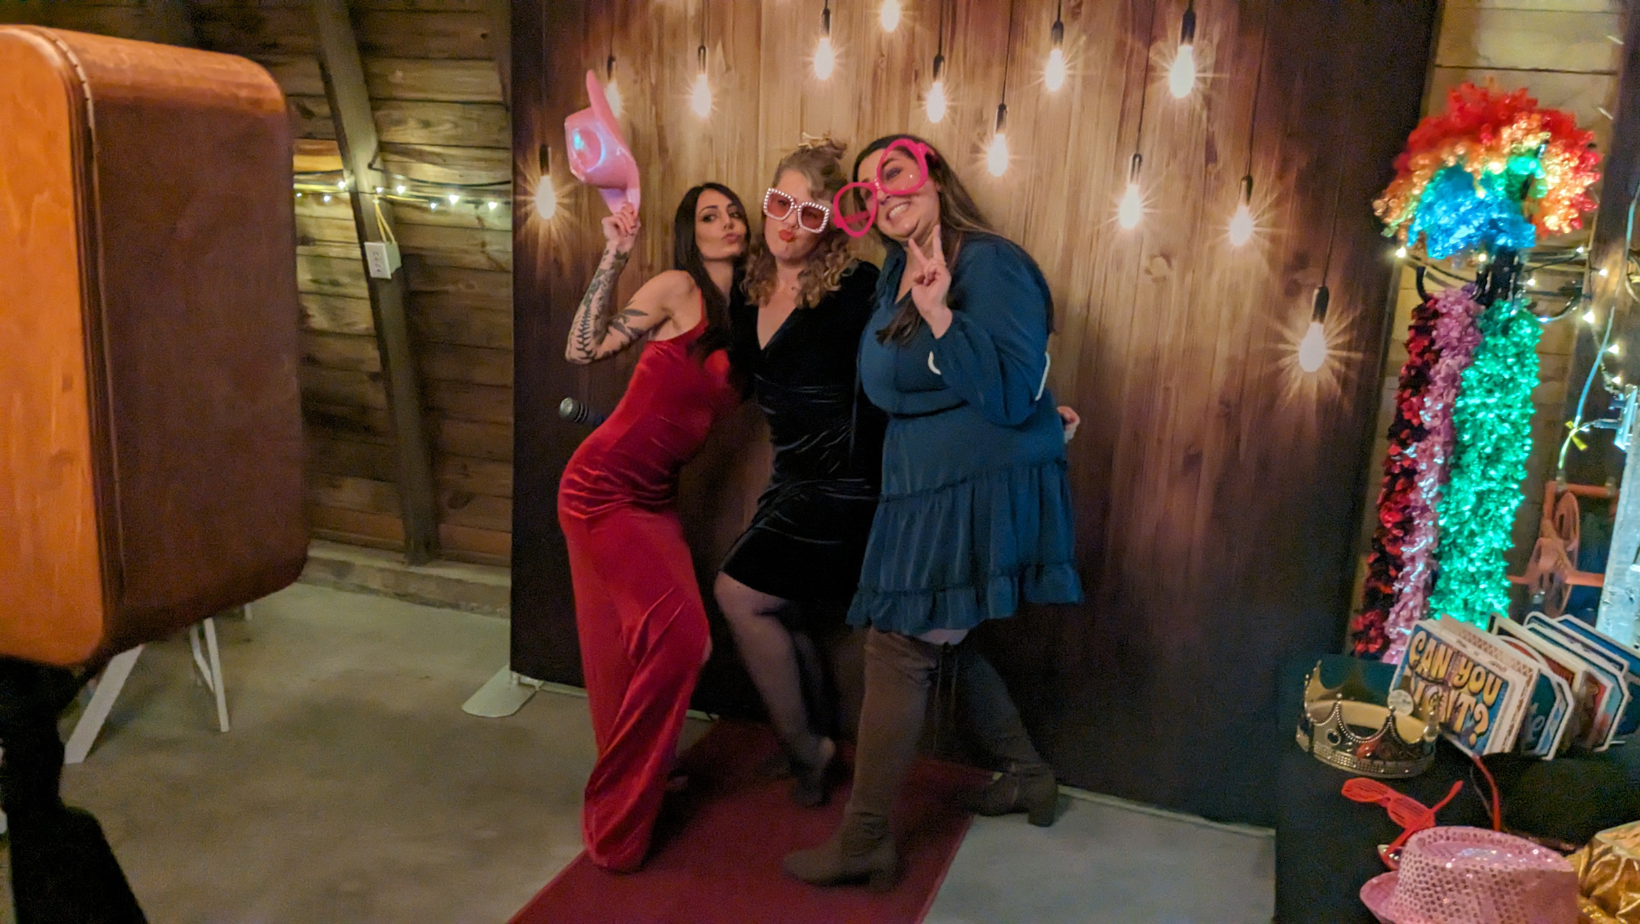 Three friends in dresses posing with fun props at a photo booth during an event.